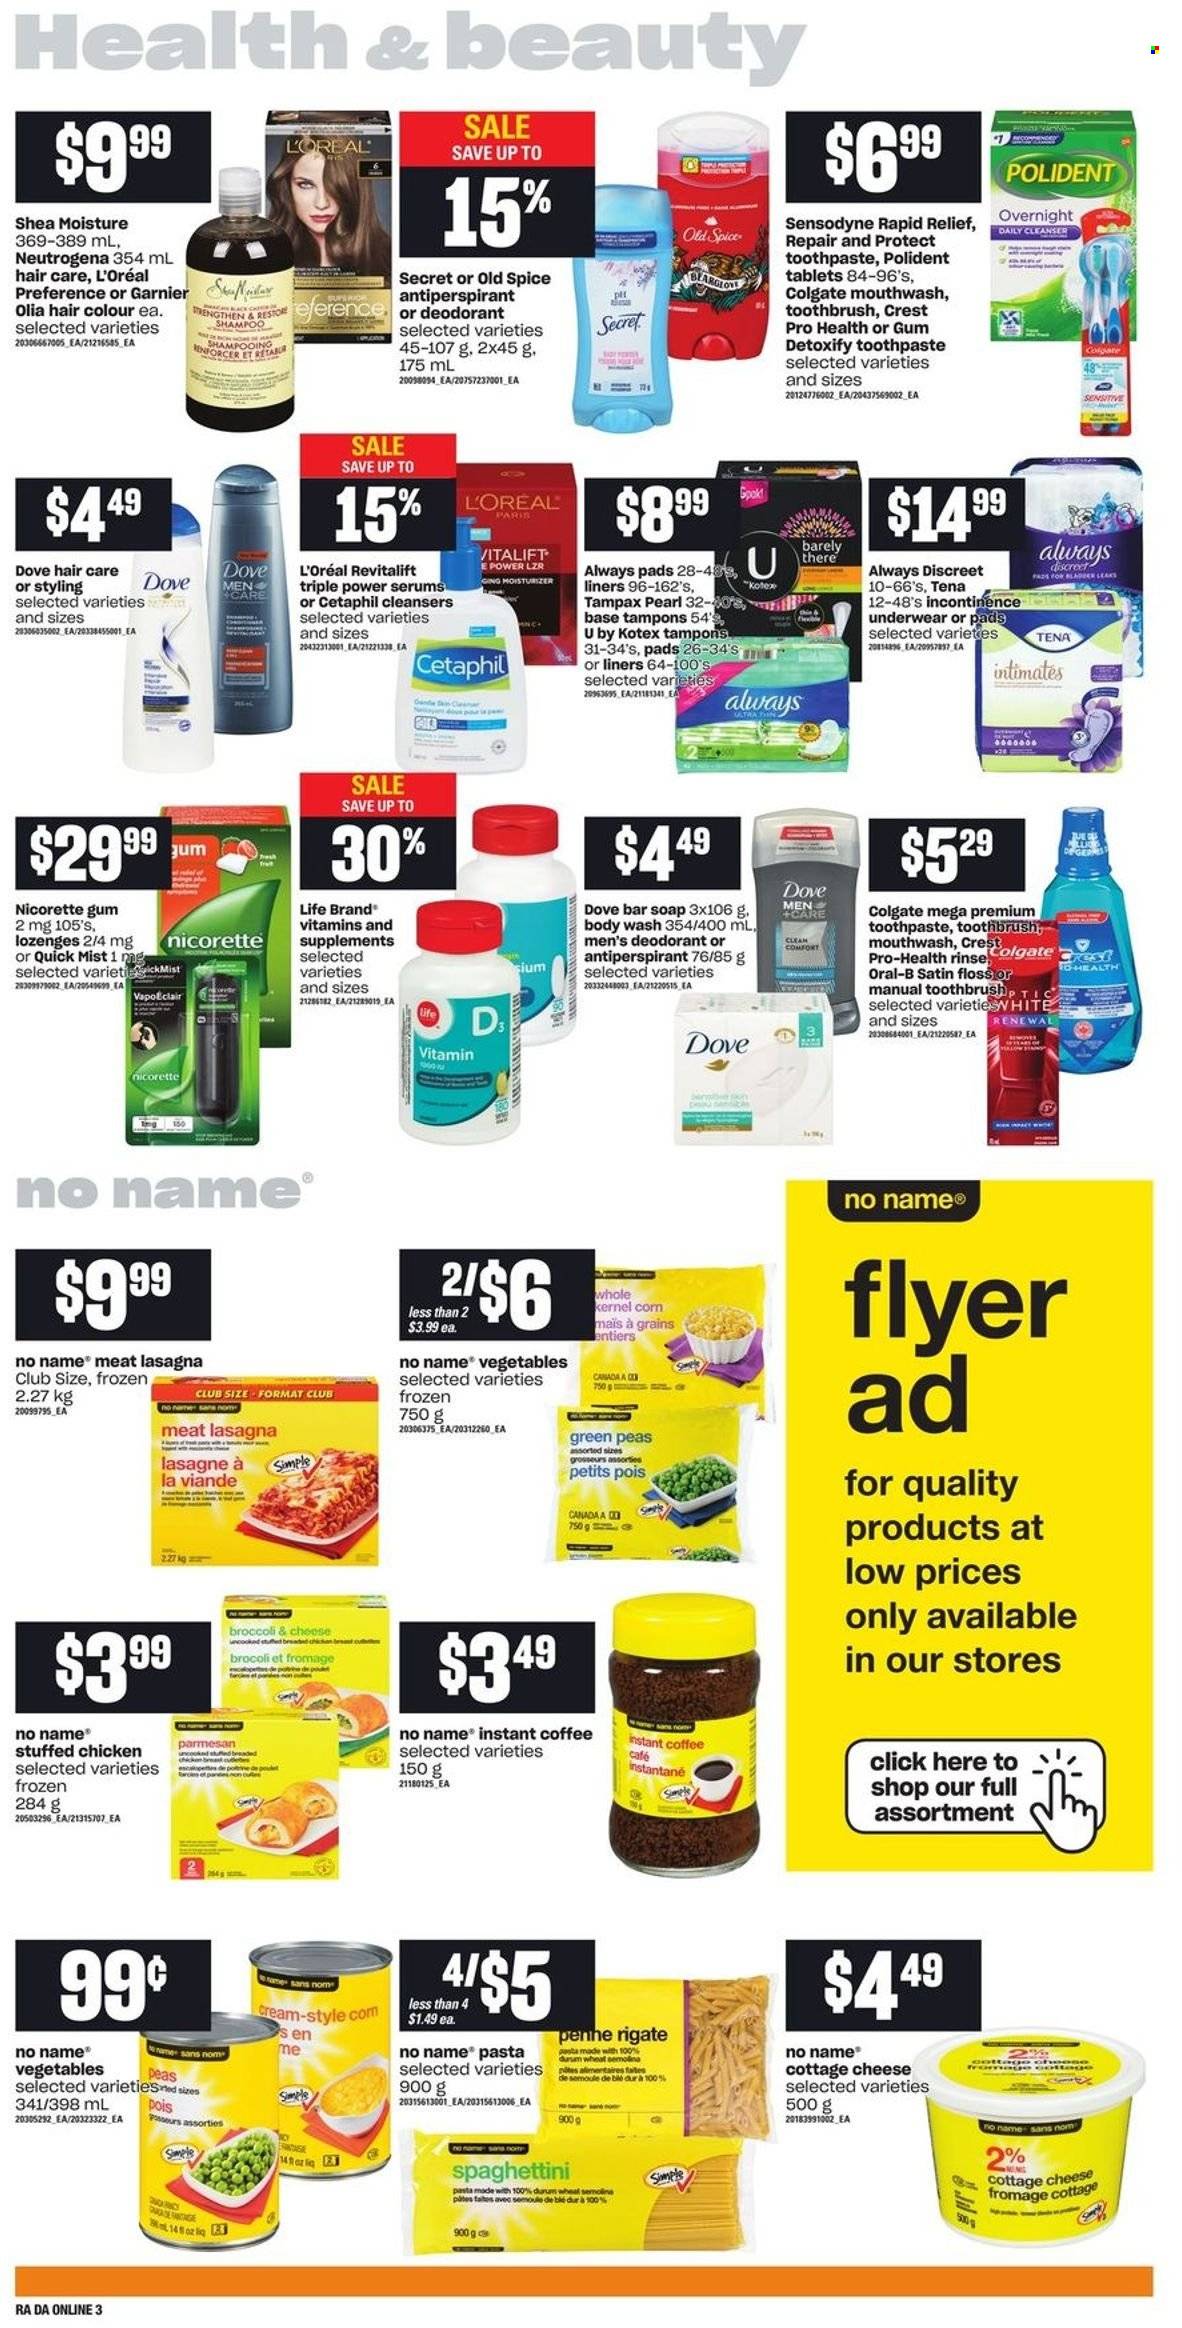 thumbnail - Atlantic Superstore Flyer - January 13, 2022 - January 19, 2022 - Sales products - broccoli, corn, peas, No Name, pasta, lasagna meal, stuffed chicken, cottage cheese, parmesan, spice, instant coffee, body wash, soap bar, soap, toothbrush, toothpaste, mouthwash, Polident, Crest, Always pads, Always Discreet, Kotex, incontinence underwear, tampons, cleanser, L’Oréal, moisturizer, hair color, anti-perspirant, Nicorette, Nicorette Gum, Dove, Colgate, Garnier, Neutrogena, shampoo, Tampax, Old Spice, Oral-B, Sensodyne, deodorant. Page 7.